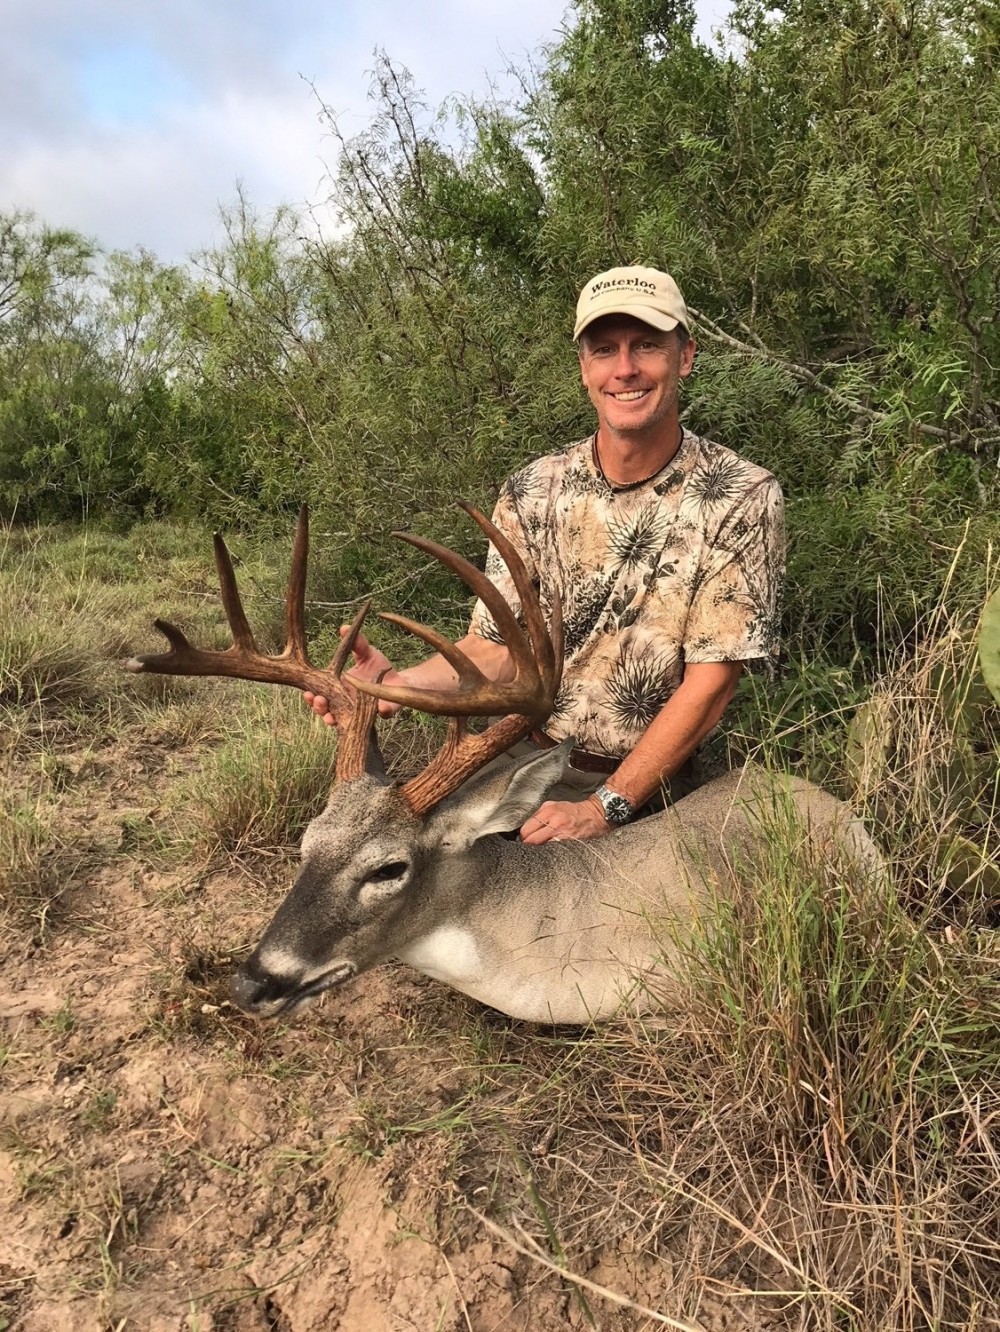 South Texas Finest Hunting Land 200+ Whitetail Deer featured image